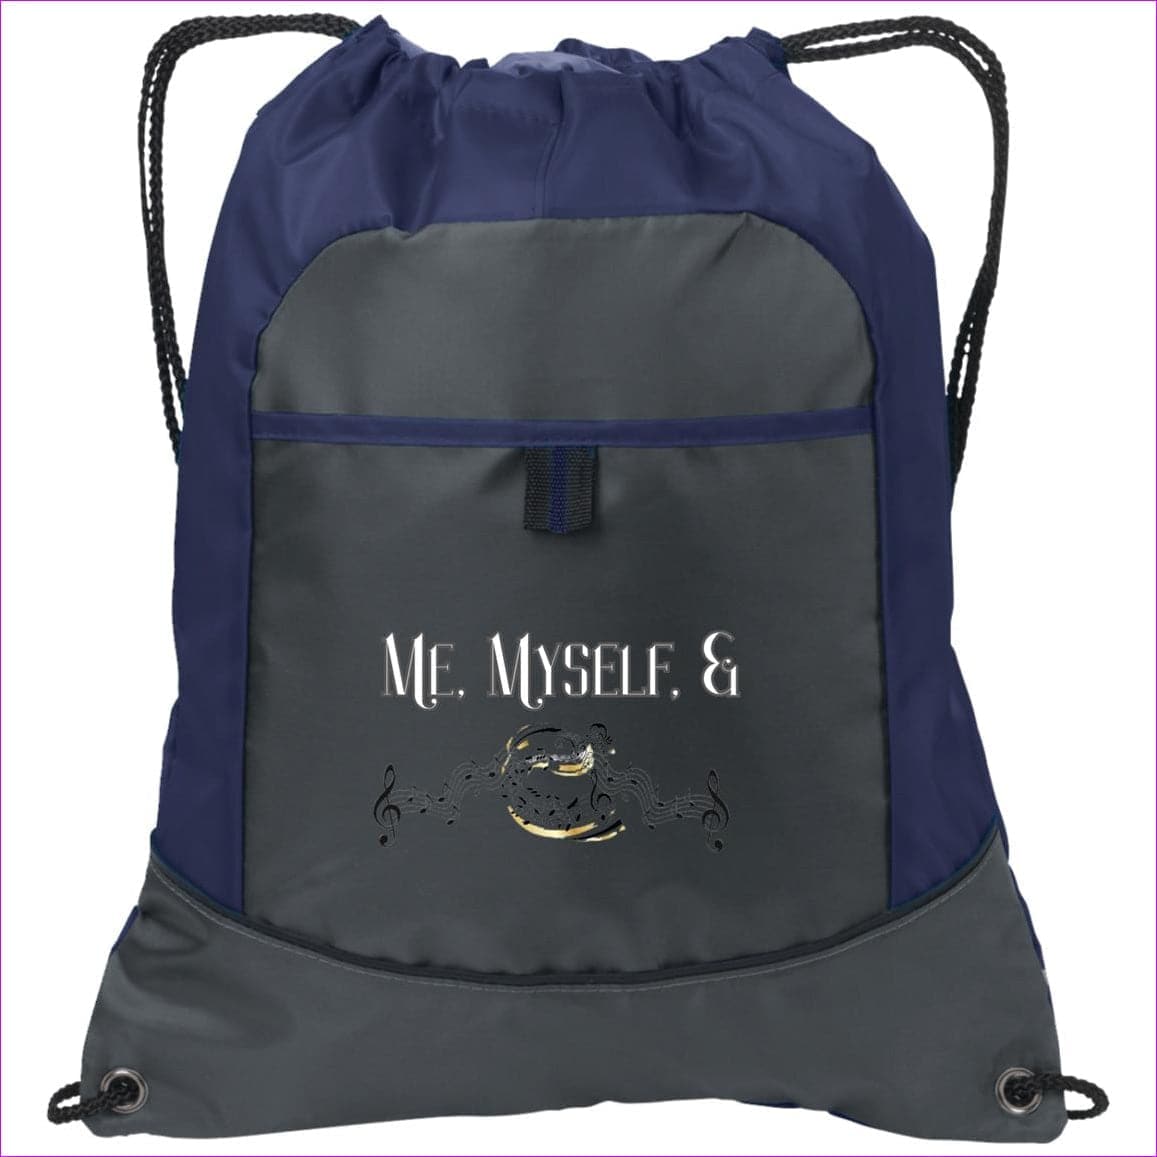 Deep Smoke/True Navy One Size Me, Myself, & Music Pocket Cinch Pack - 4 colors - bookbag at TFC&H Co.